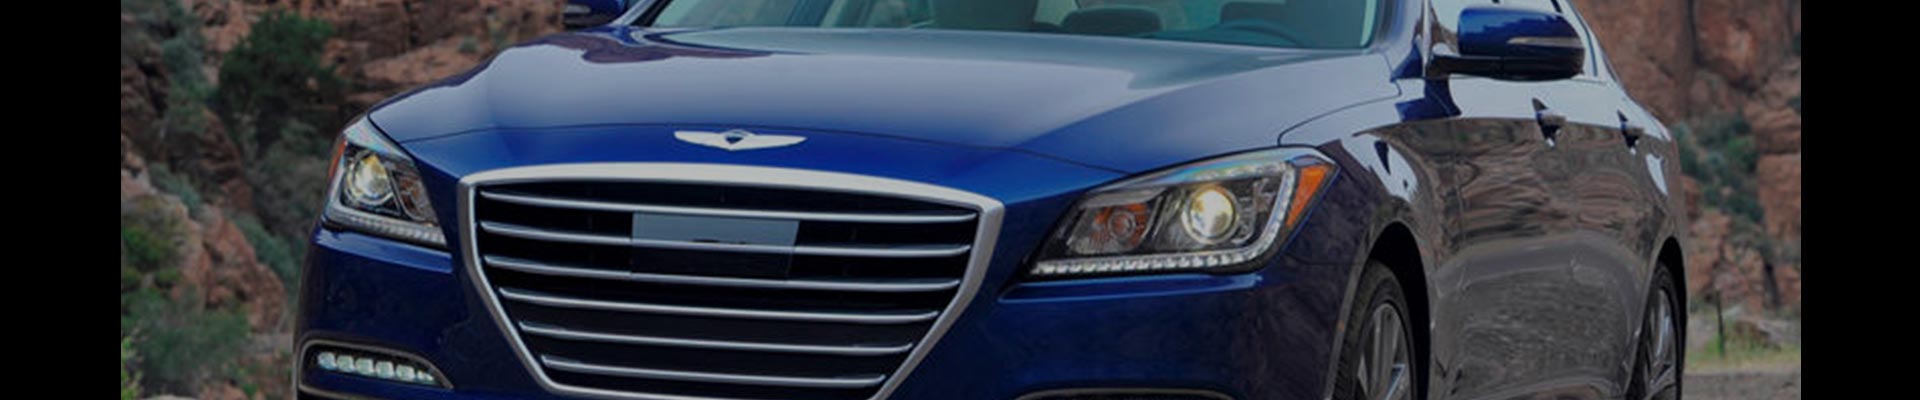 Shop Replacement and OEM 2015 Hyundai Genesis Parts with Discounted Price on the Net